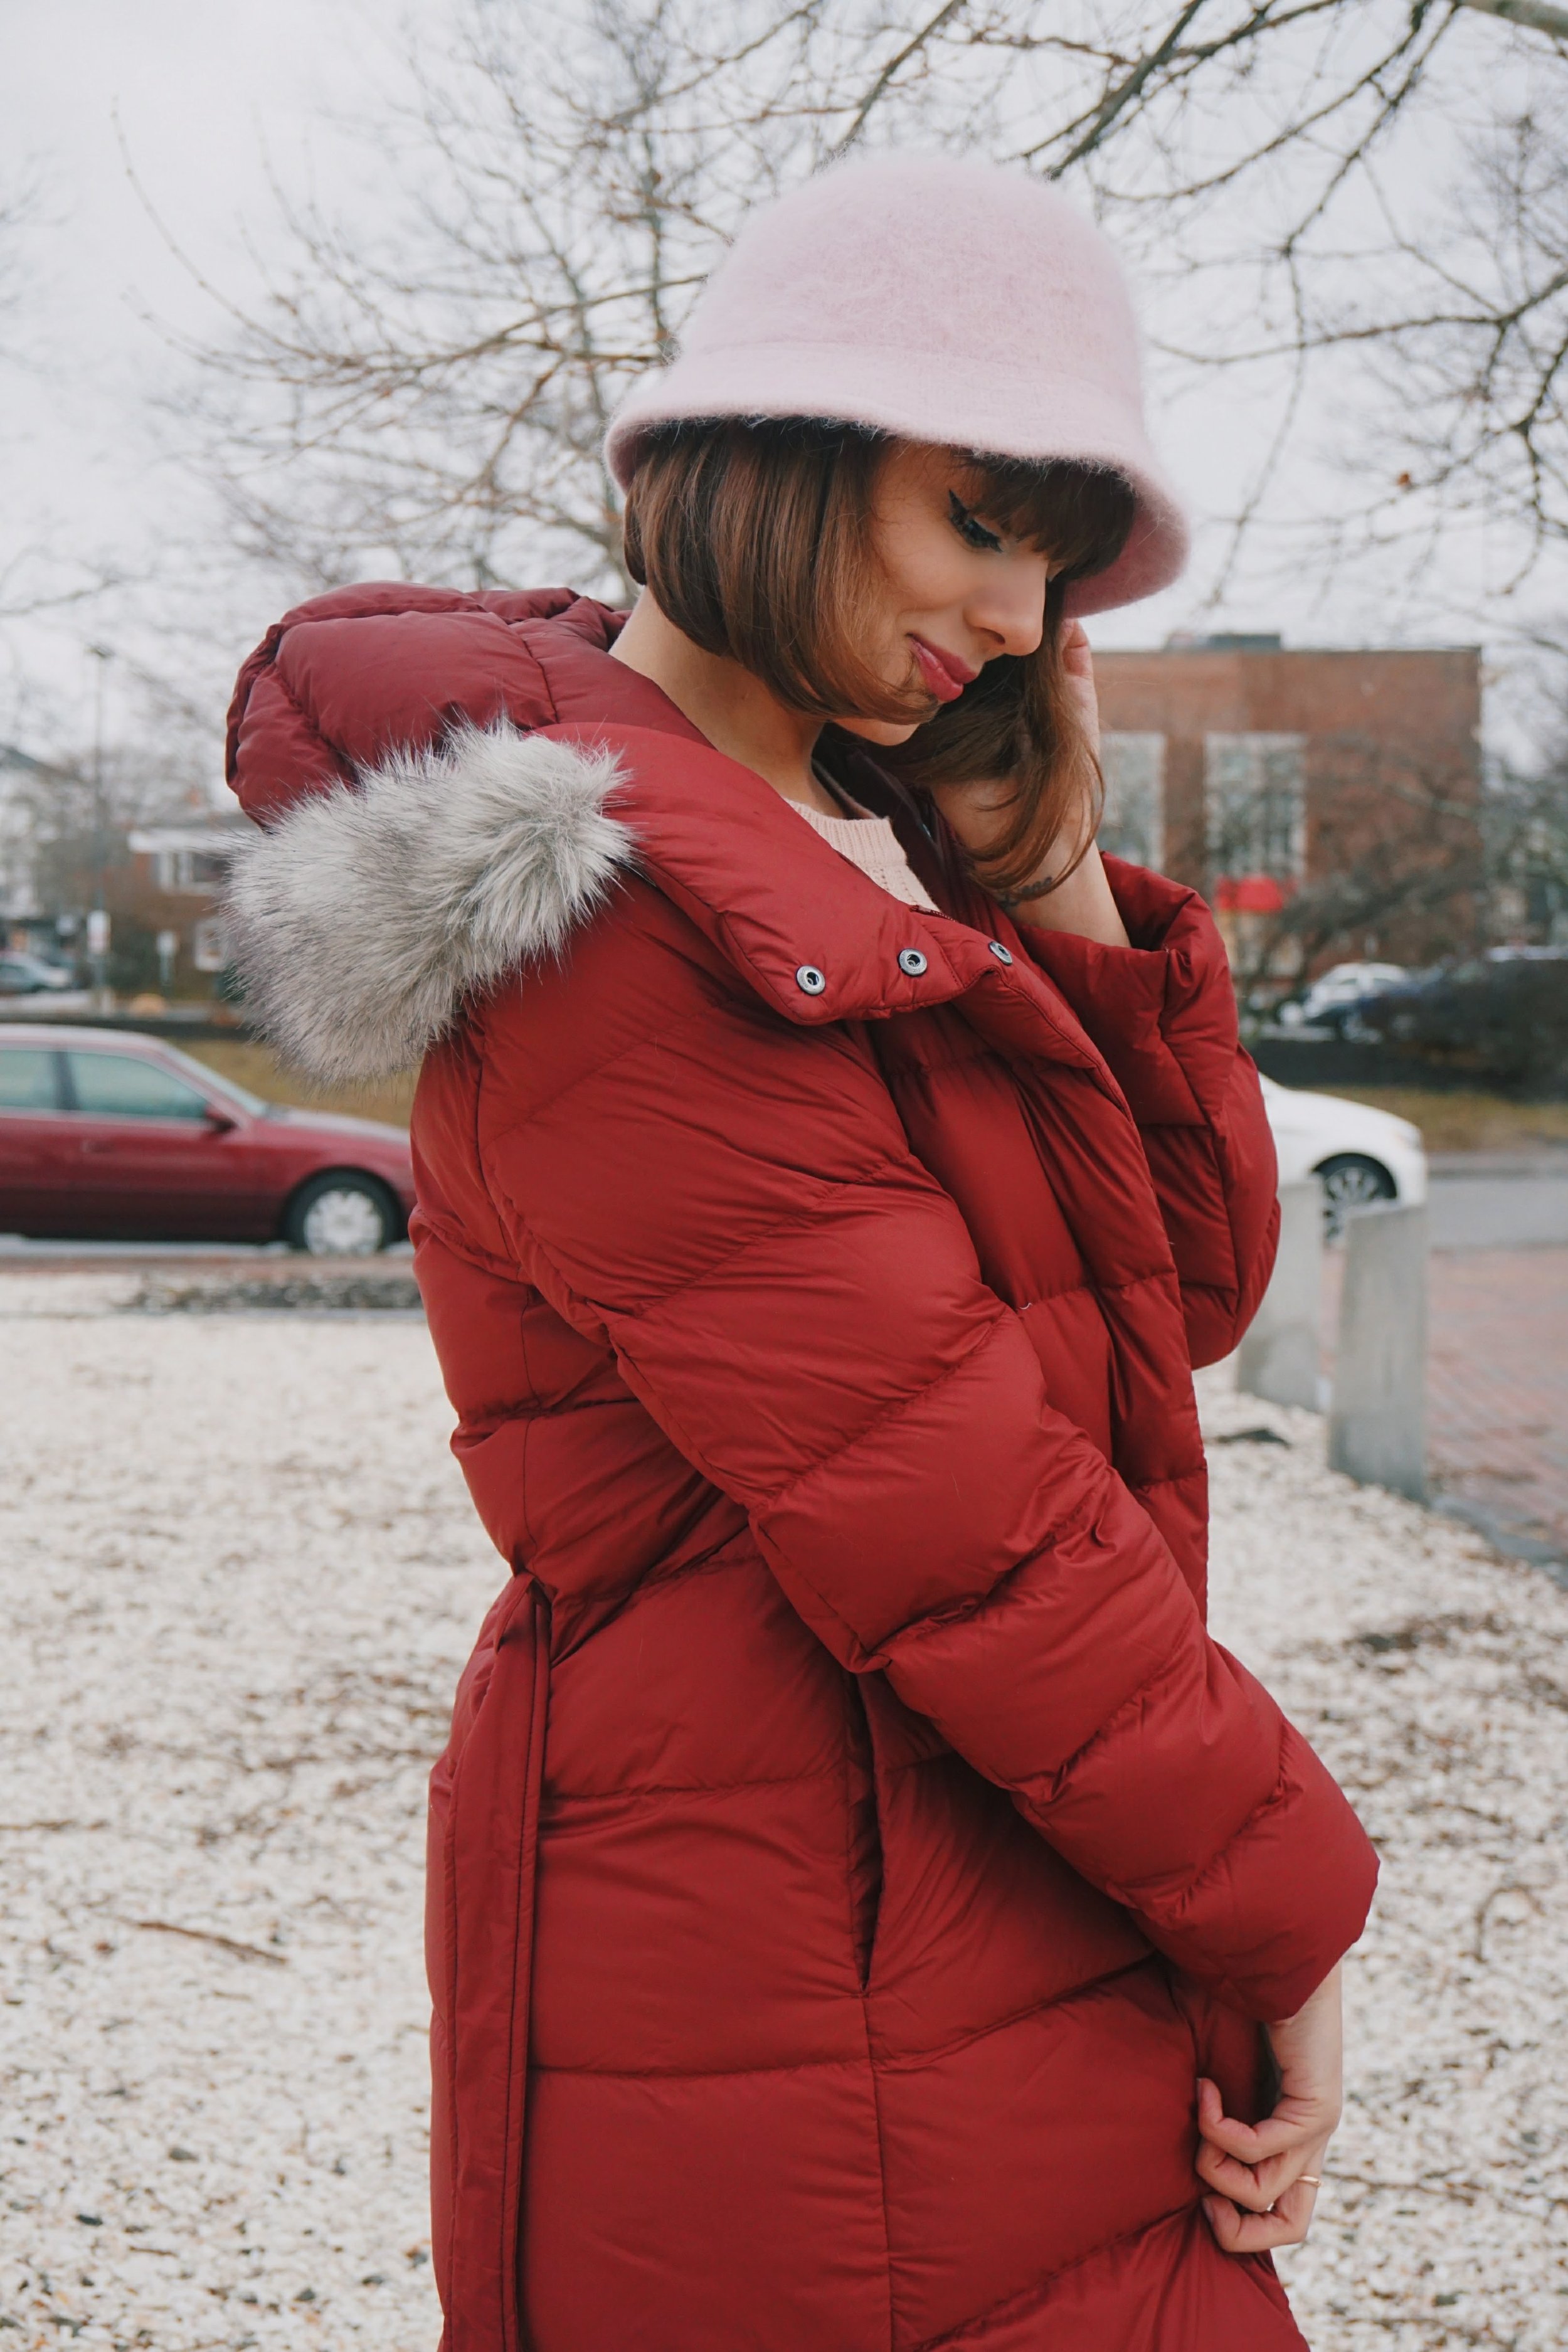 This Is the Most Stylish Winter Coat! — Life of Ardor